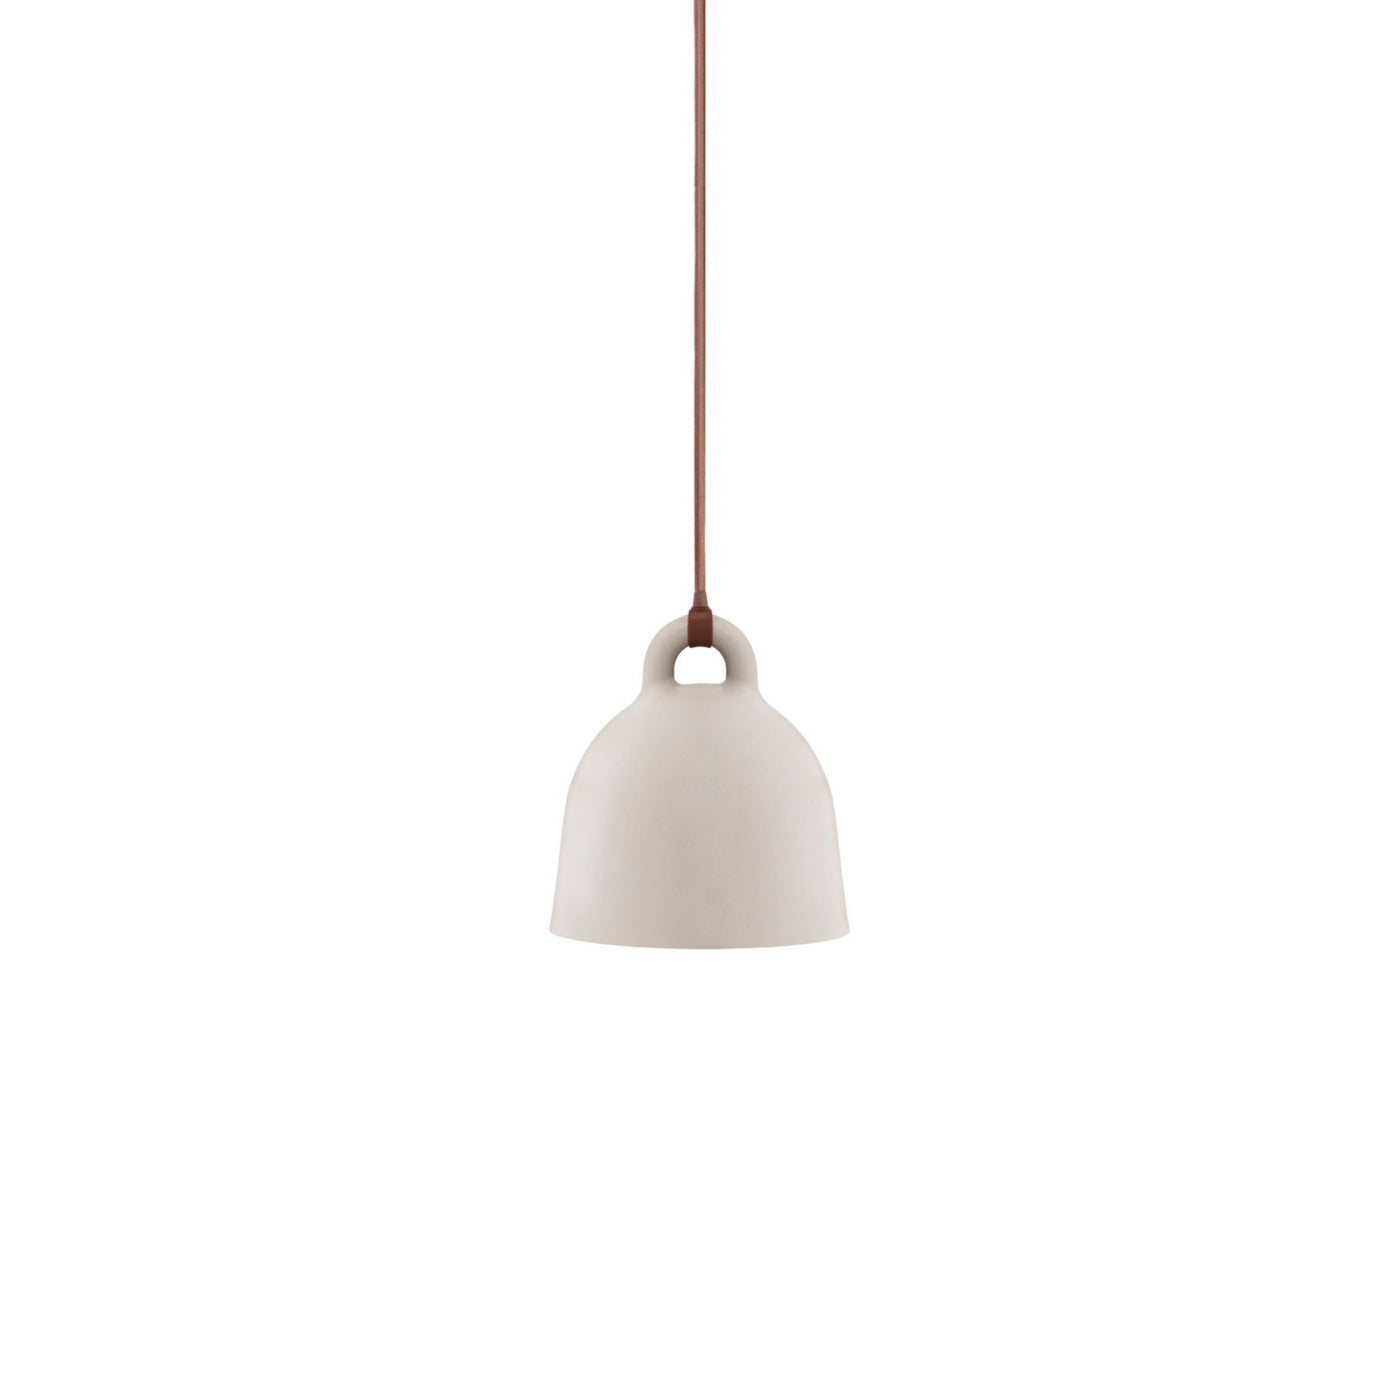 Norman Copenhagen Bell Pendant Lamp in sand. Free UK delivery from someday designs #size_extra-small